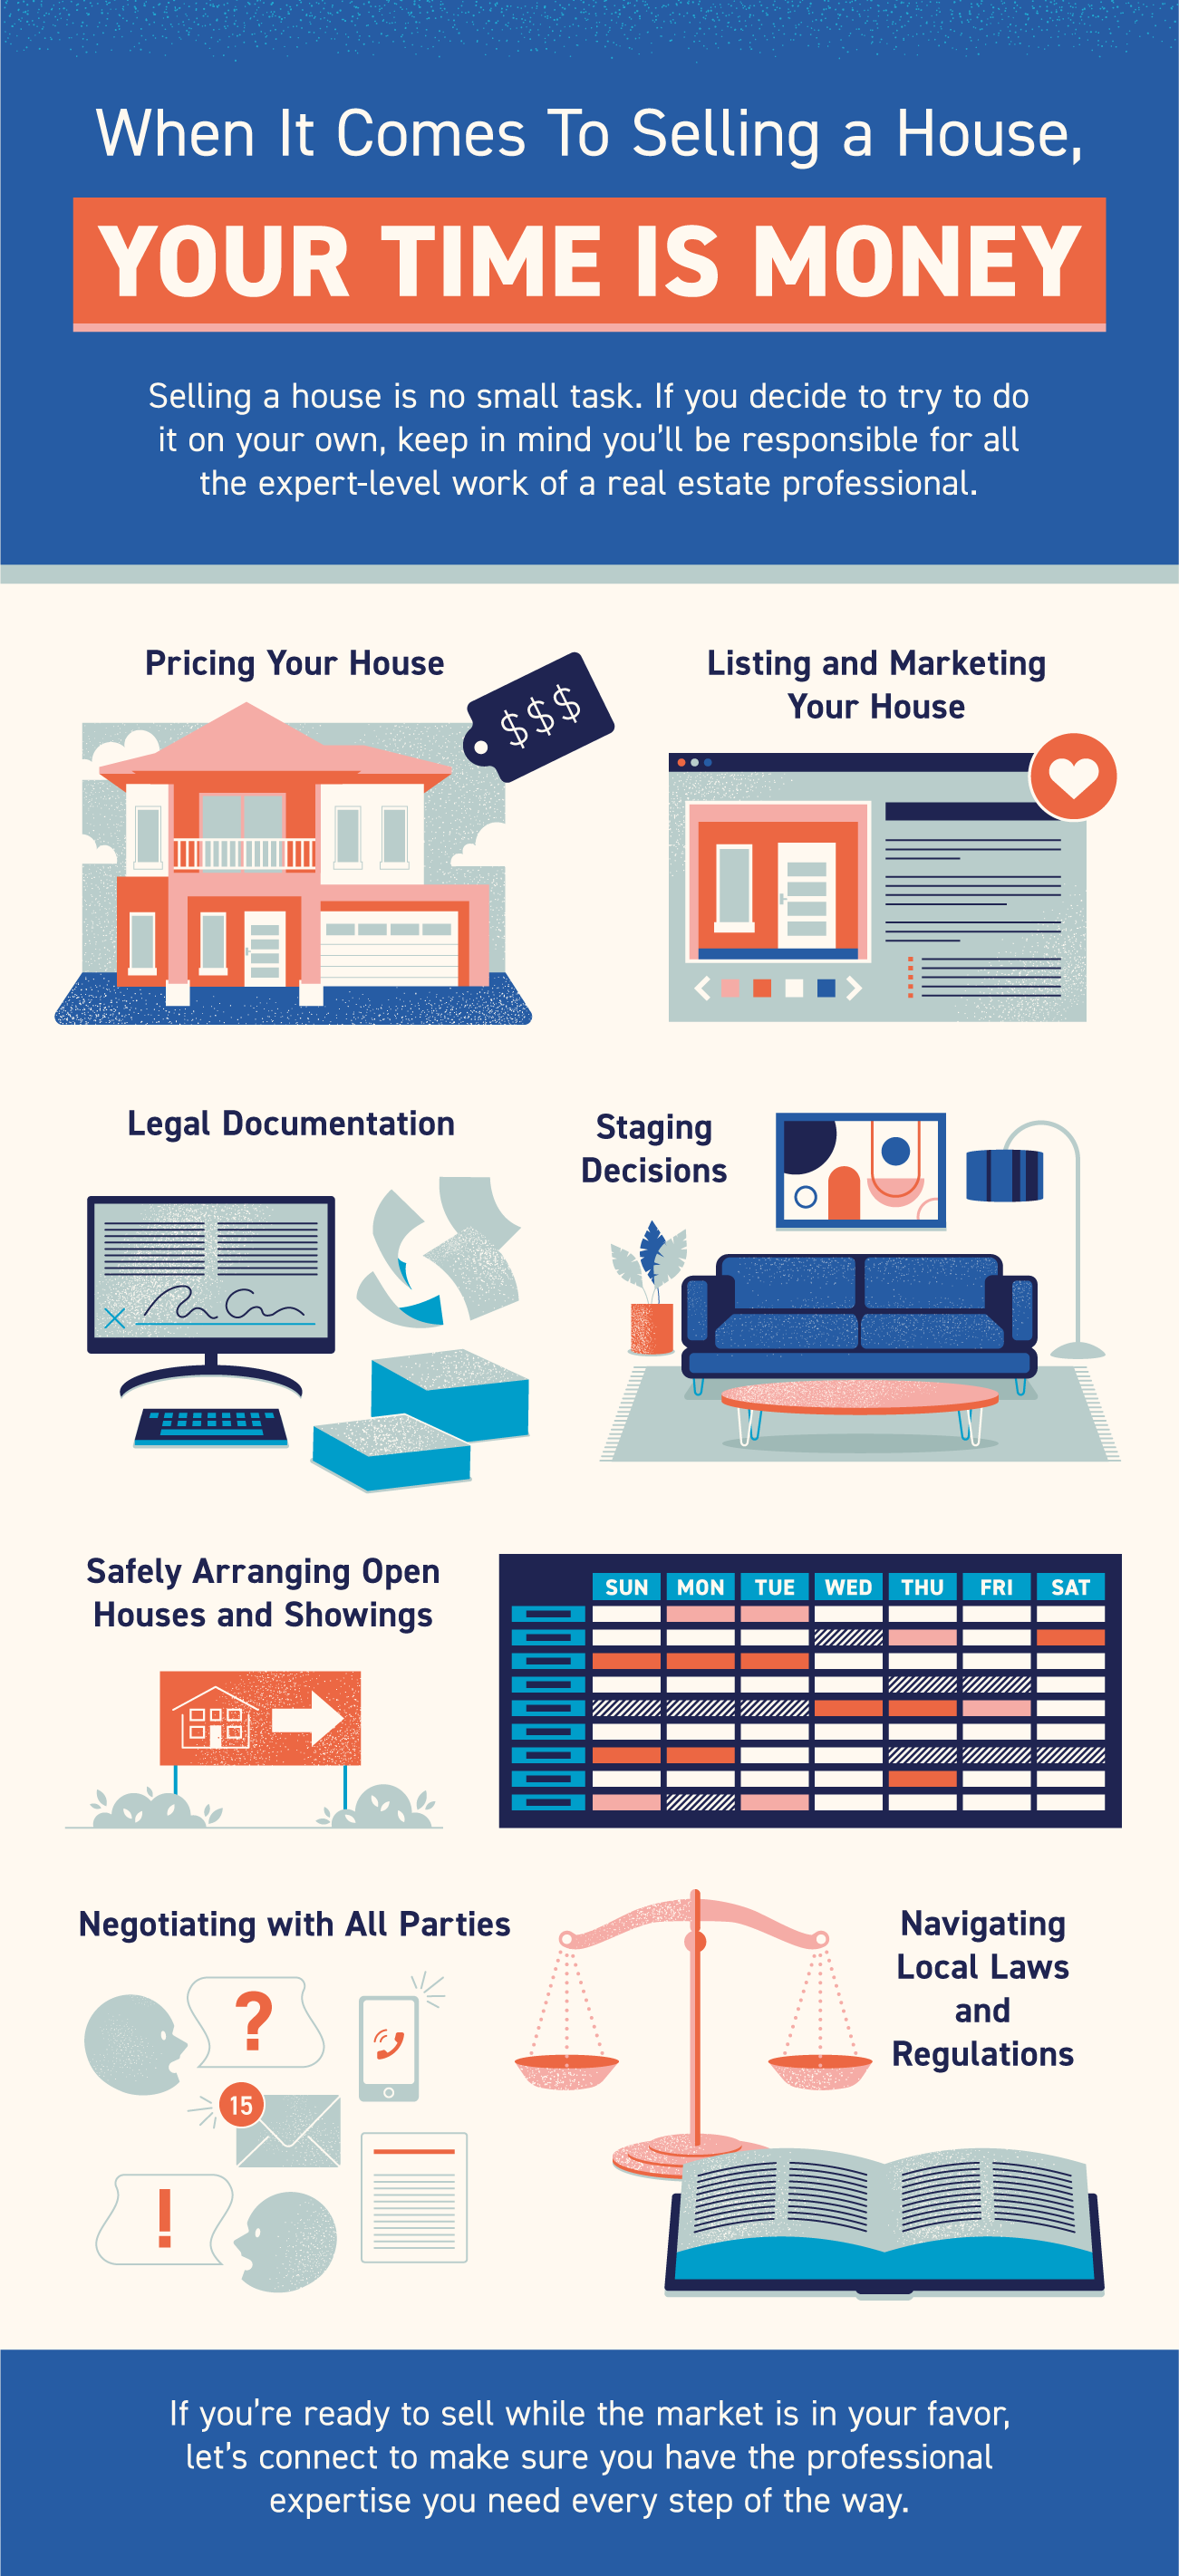 When It Comes To Selling a House, Your Time Is Money [INFOGRAPHIC] | Simplifying The Market